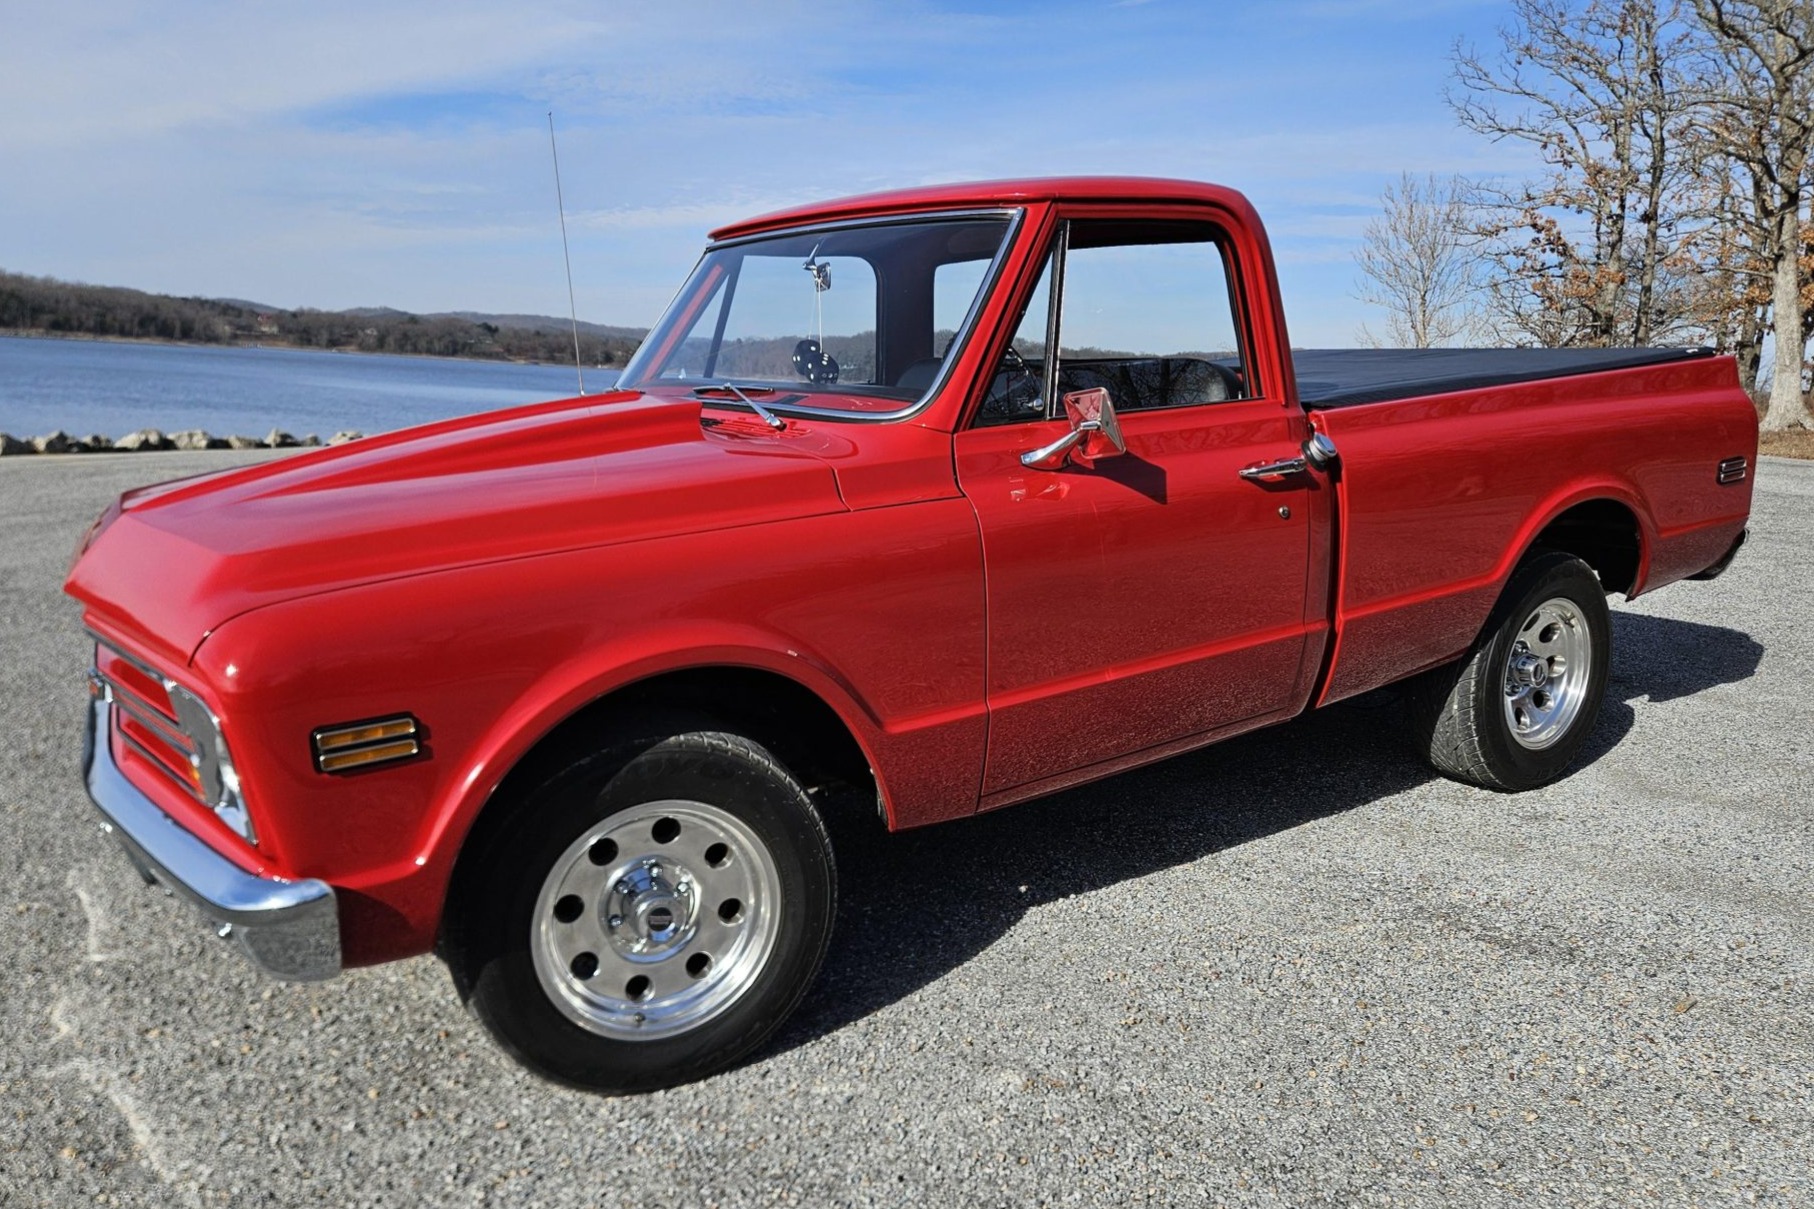 Used 383-Powered 1968 Chevrolet C10 Pickup 4-Speed Review